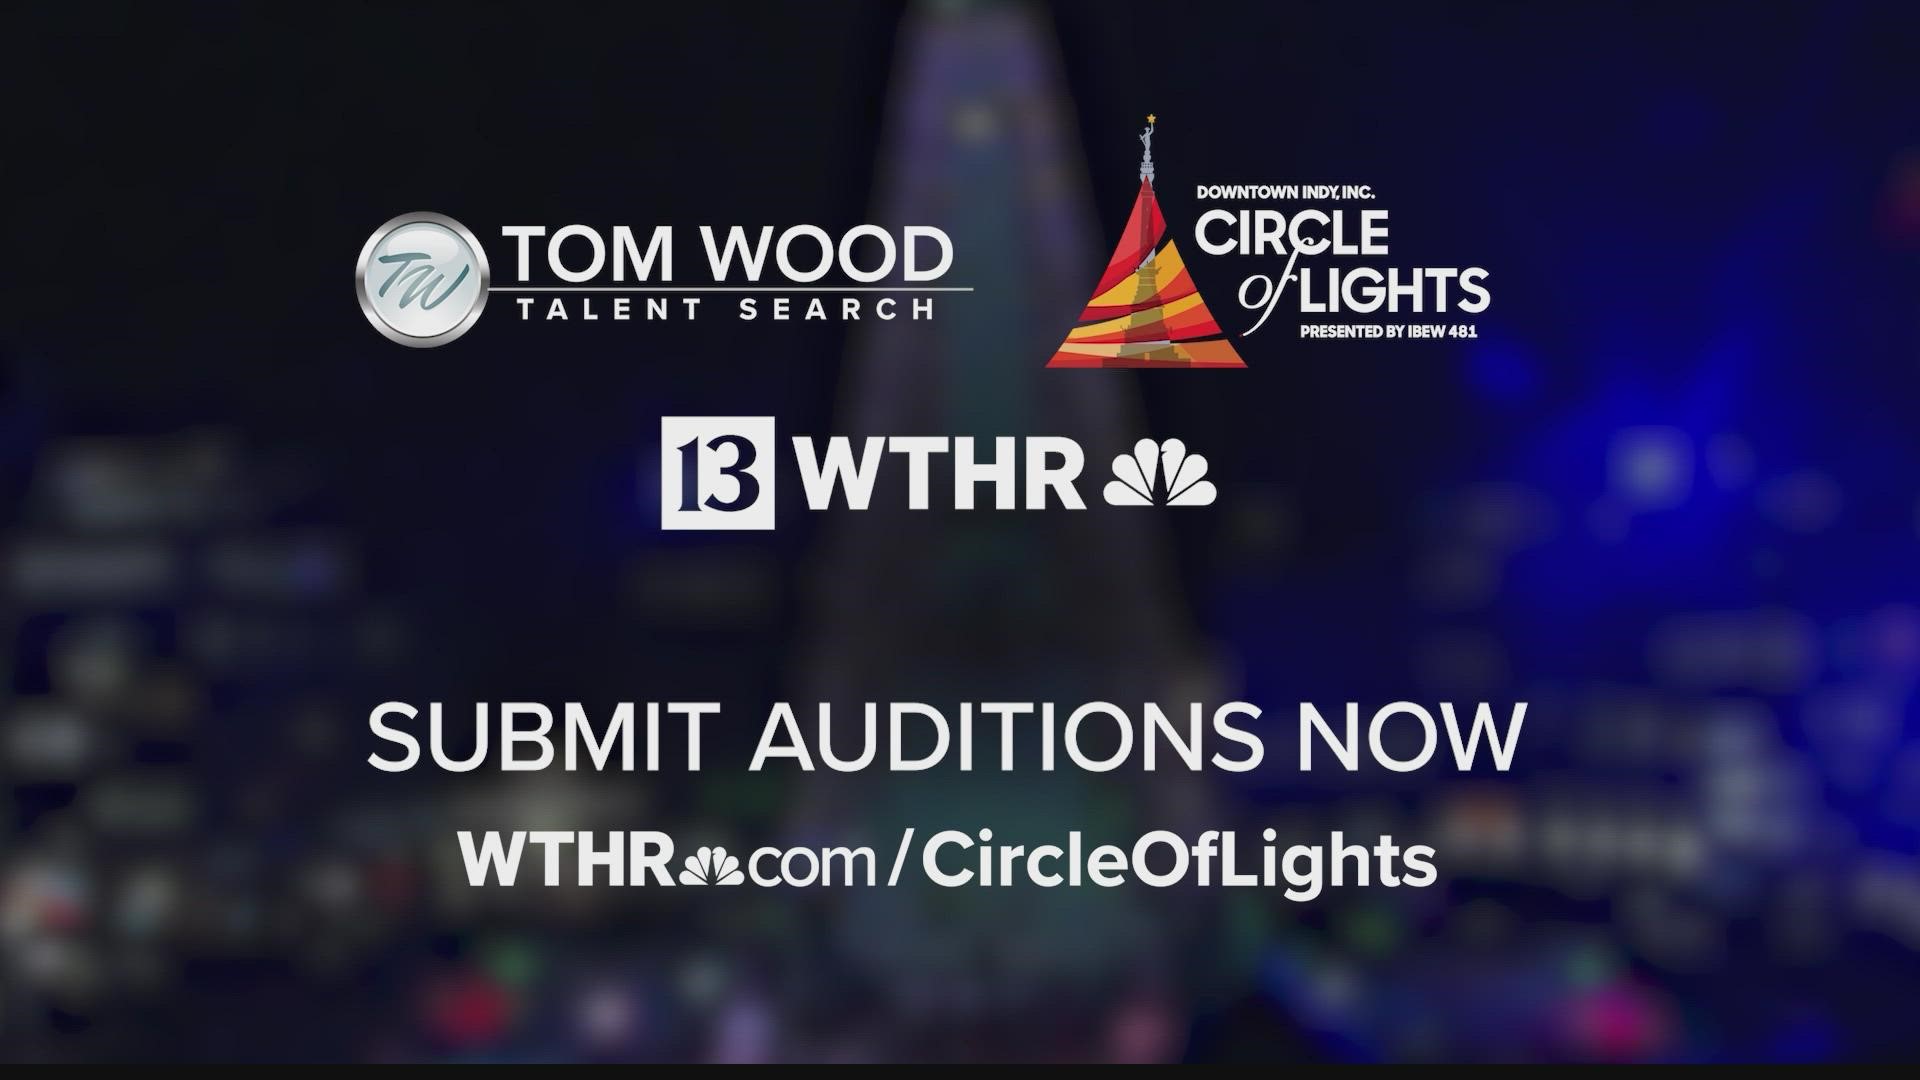 Auditions are now open for this year's "Circle of Lights" show.